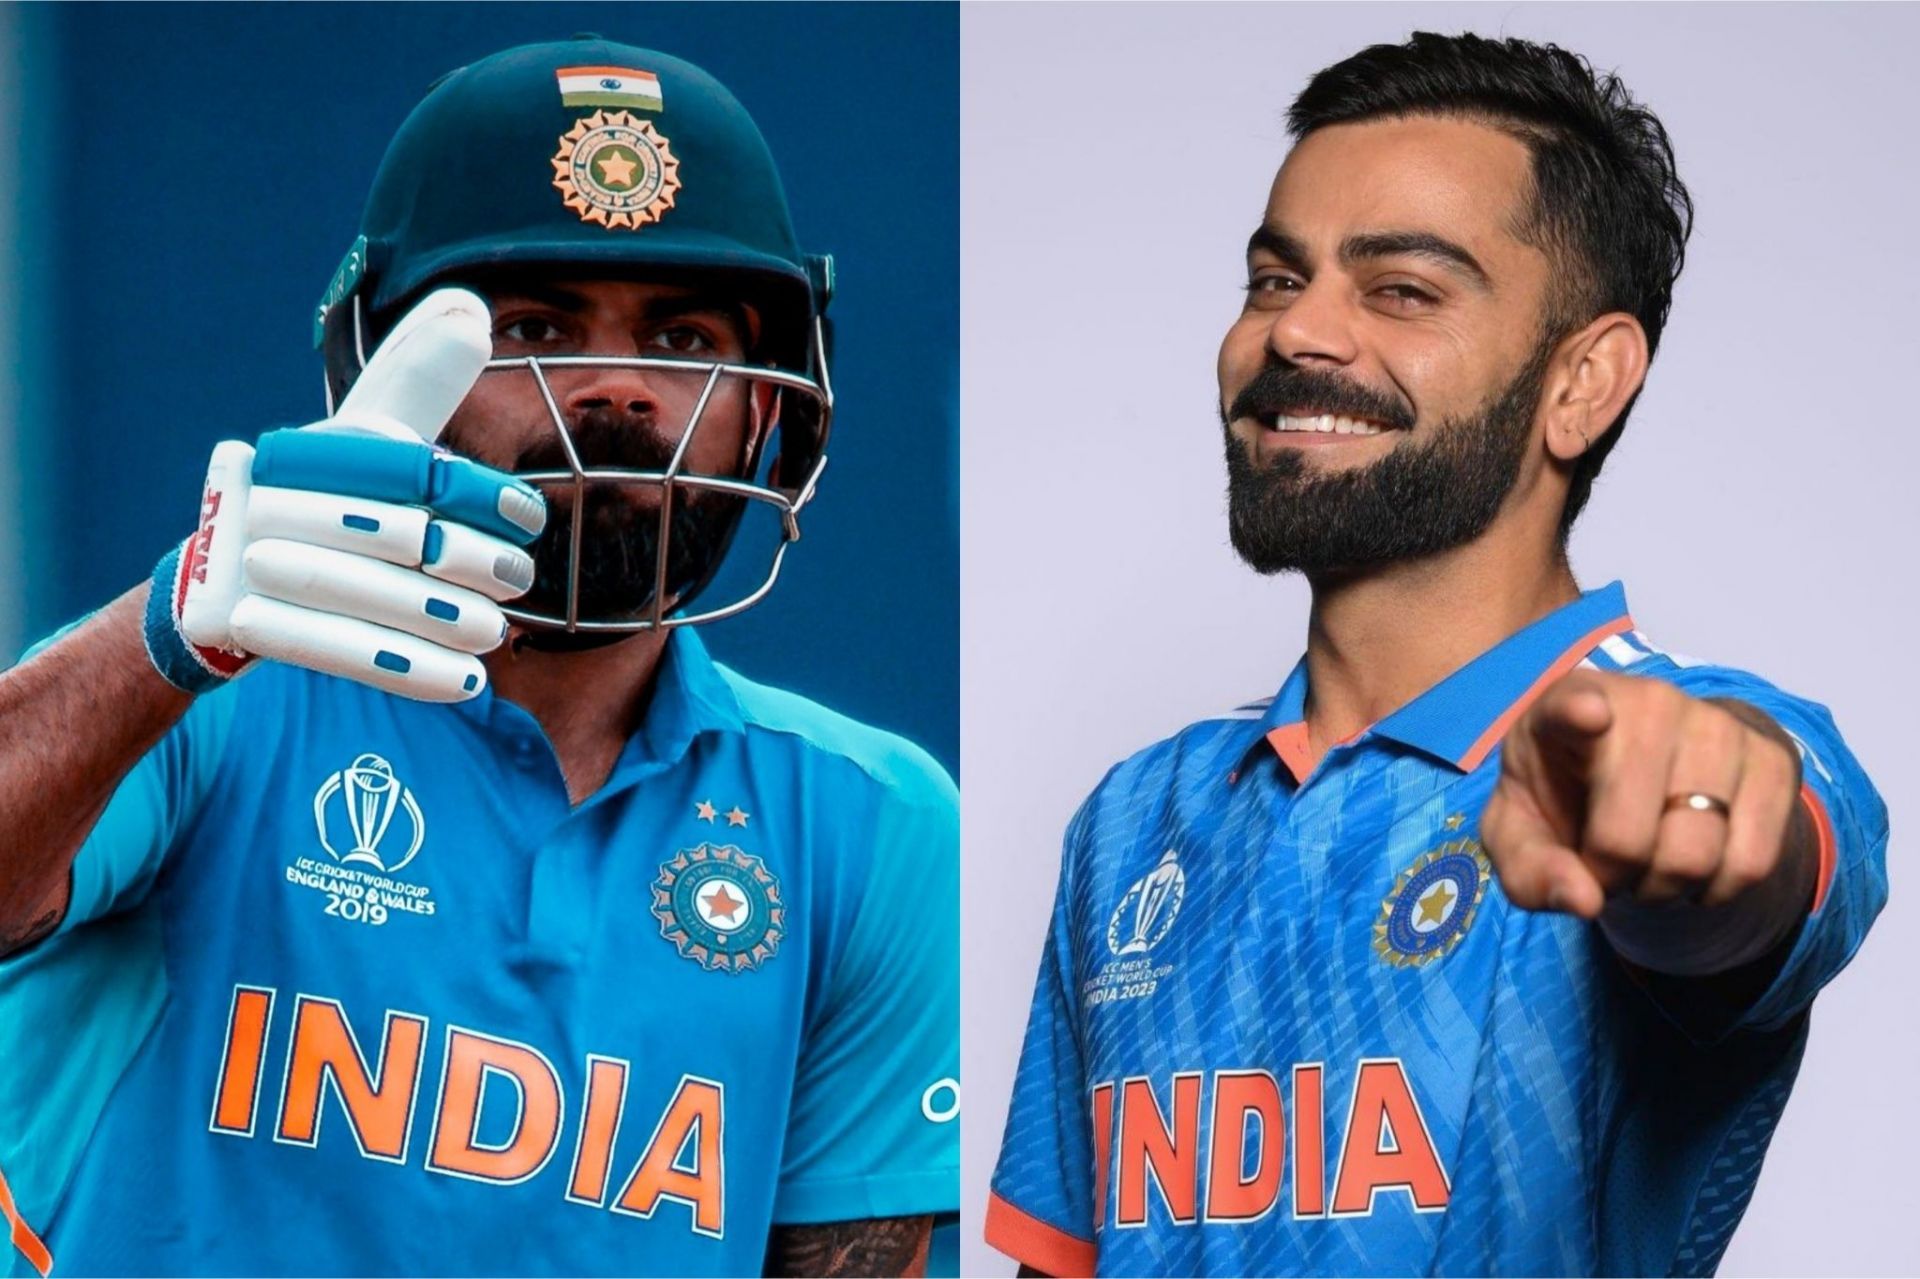 Virat Kohli will be a key batter for India at the 2023 ODI World Cup [Twitter]